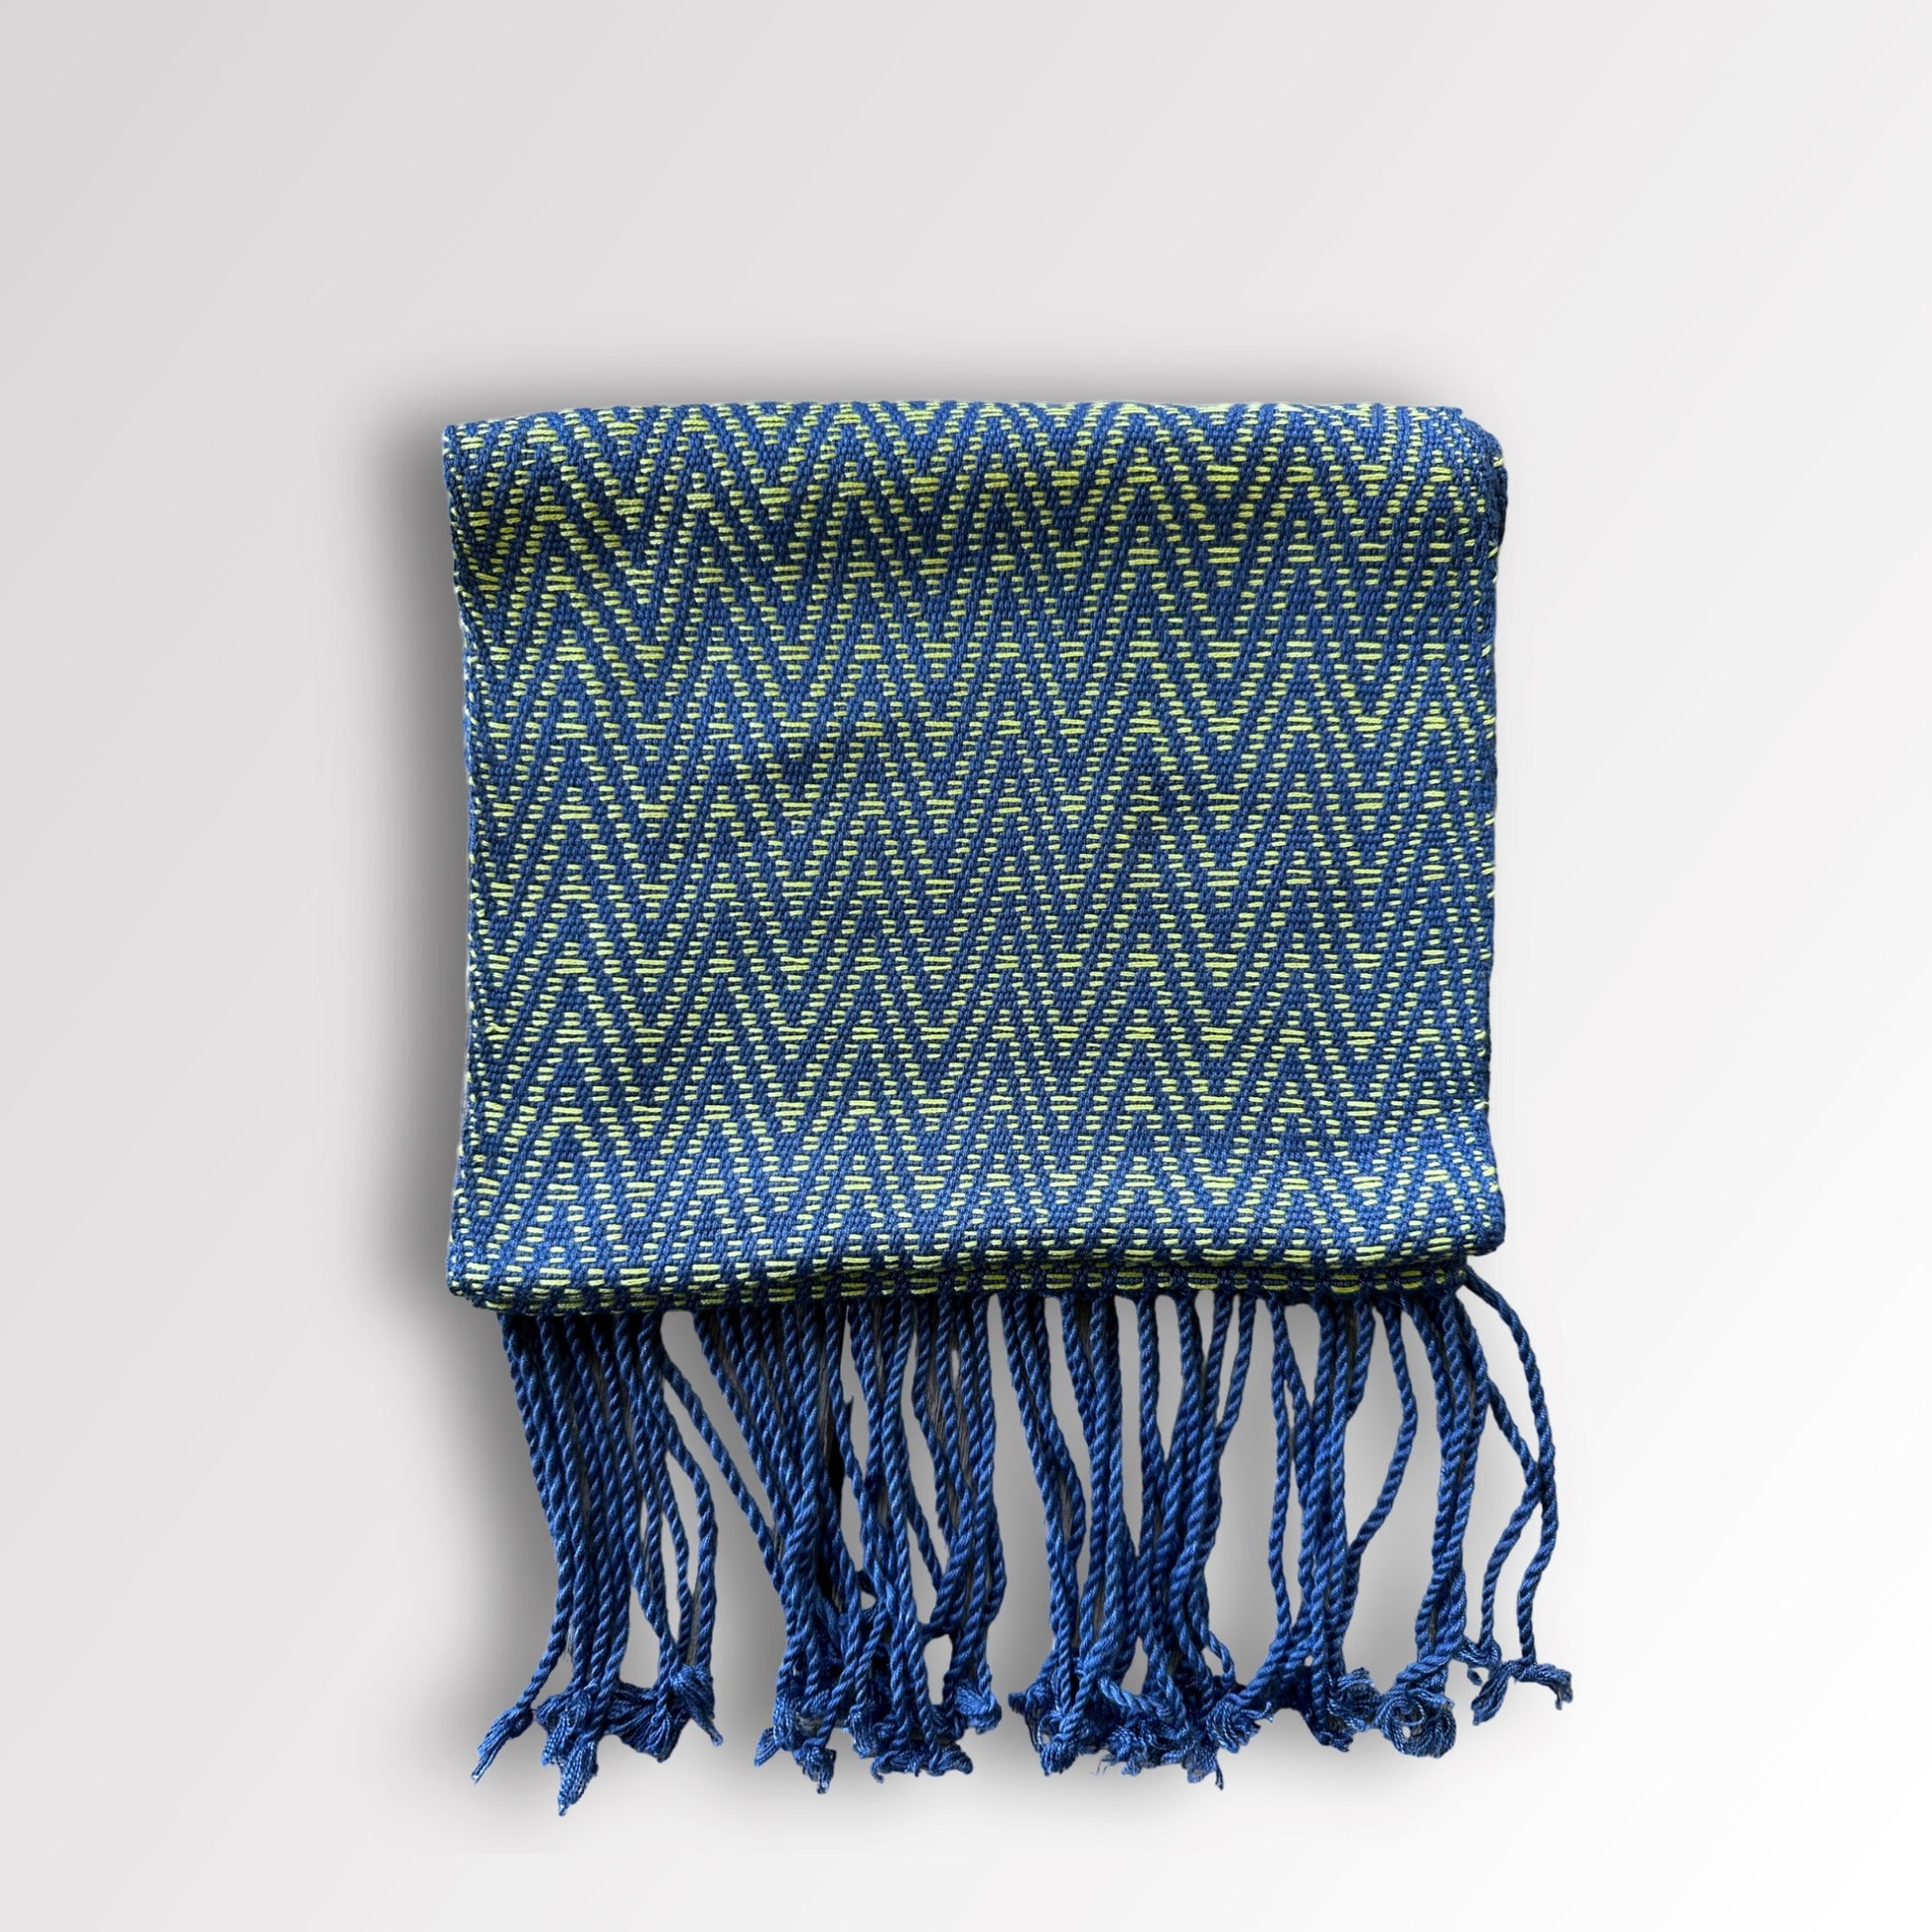 Mountain Scarf, Hand-loomed Scarves and shawls WEFTshop 